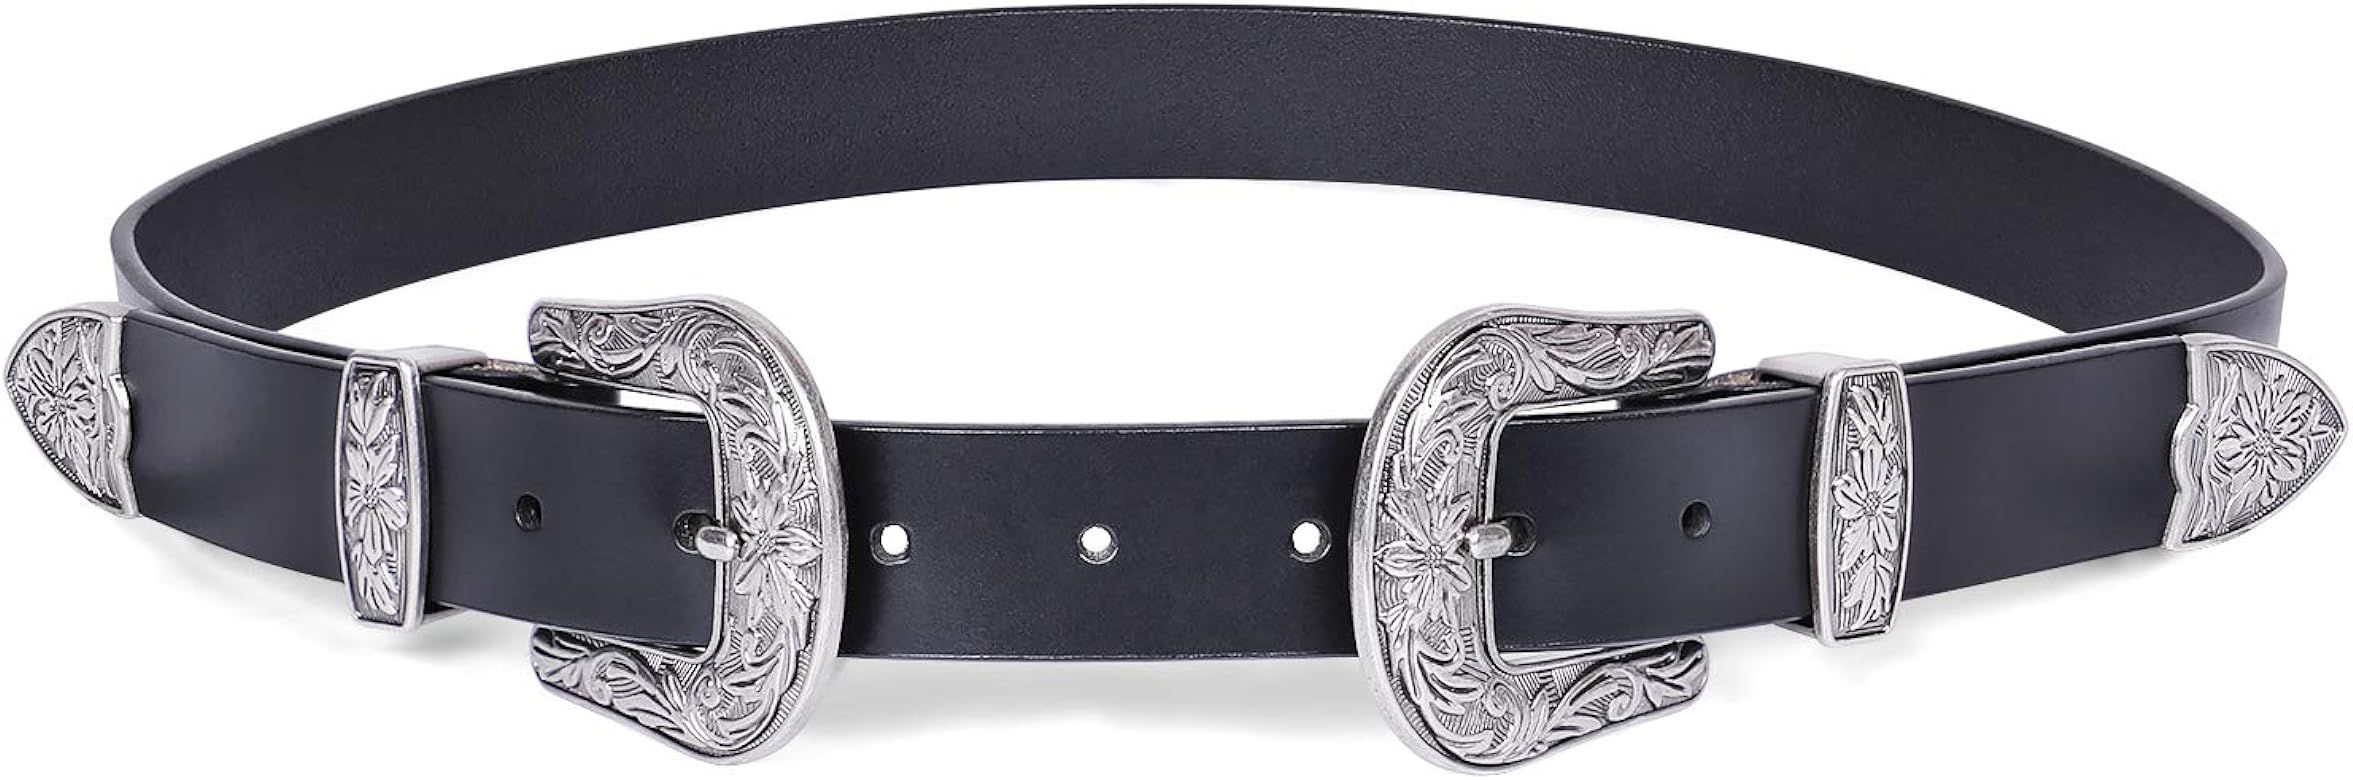 SUOSDEY Fashion Leather Belts for Women with Vintage Metal Buckle Belt | Amazon (US)